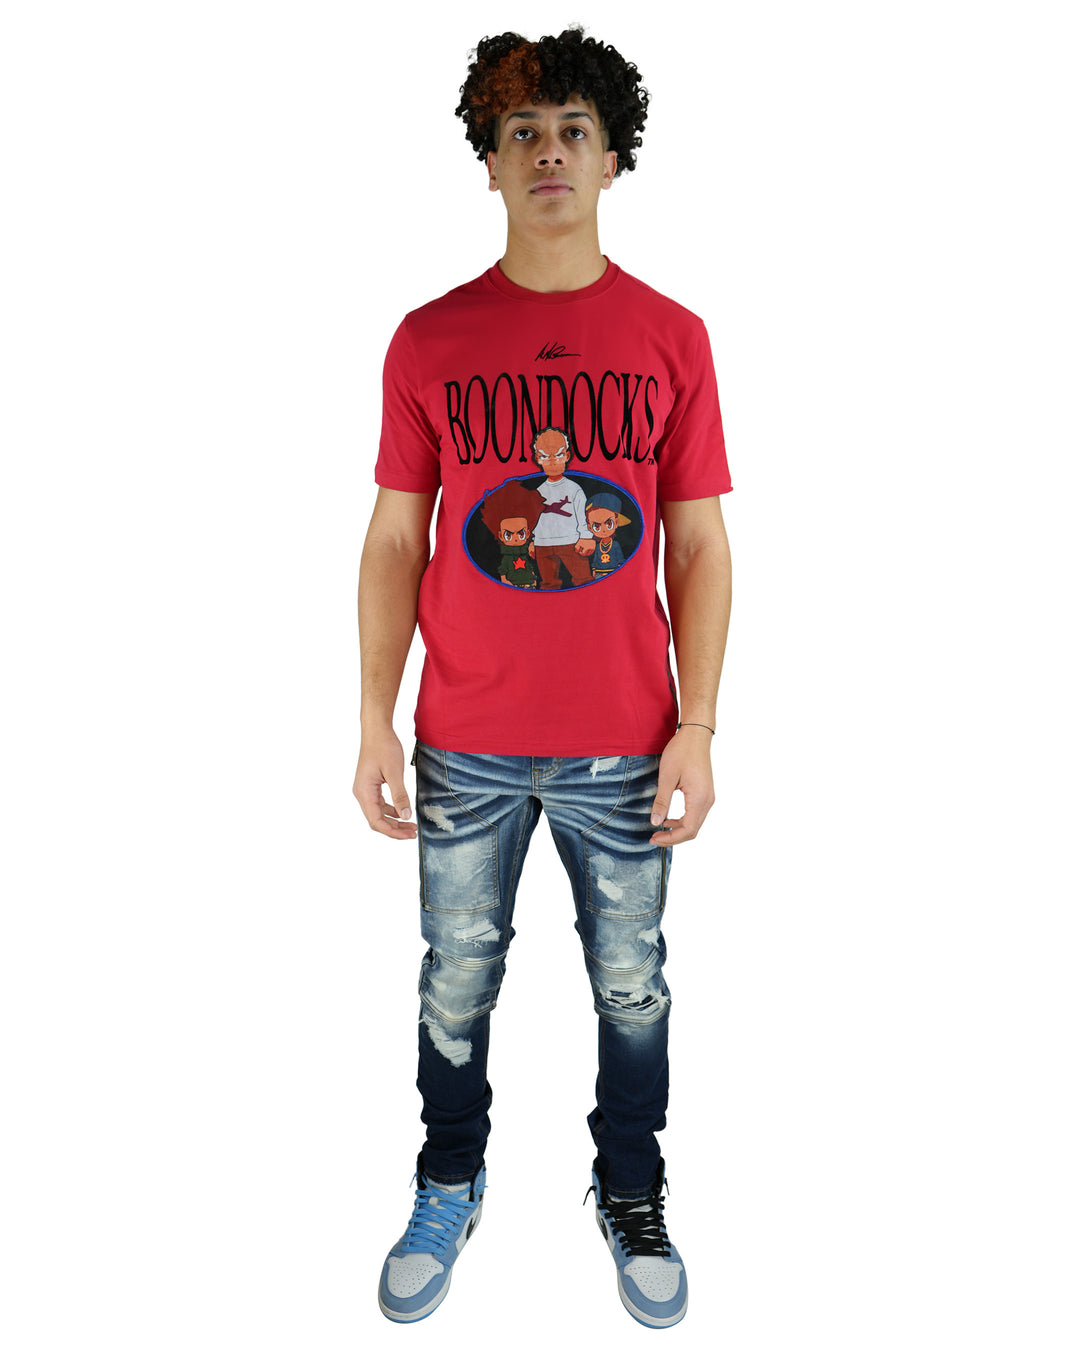 The Boondocks - Family Portrait Red T-Shirt